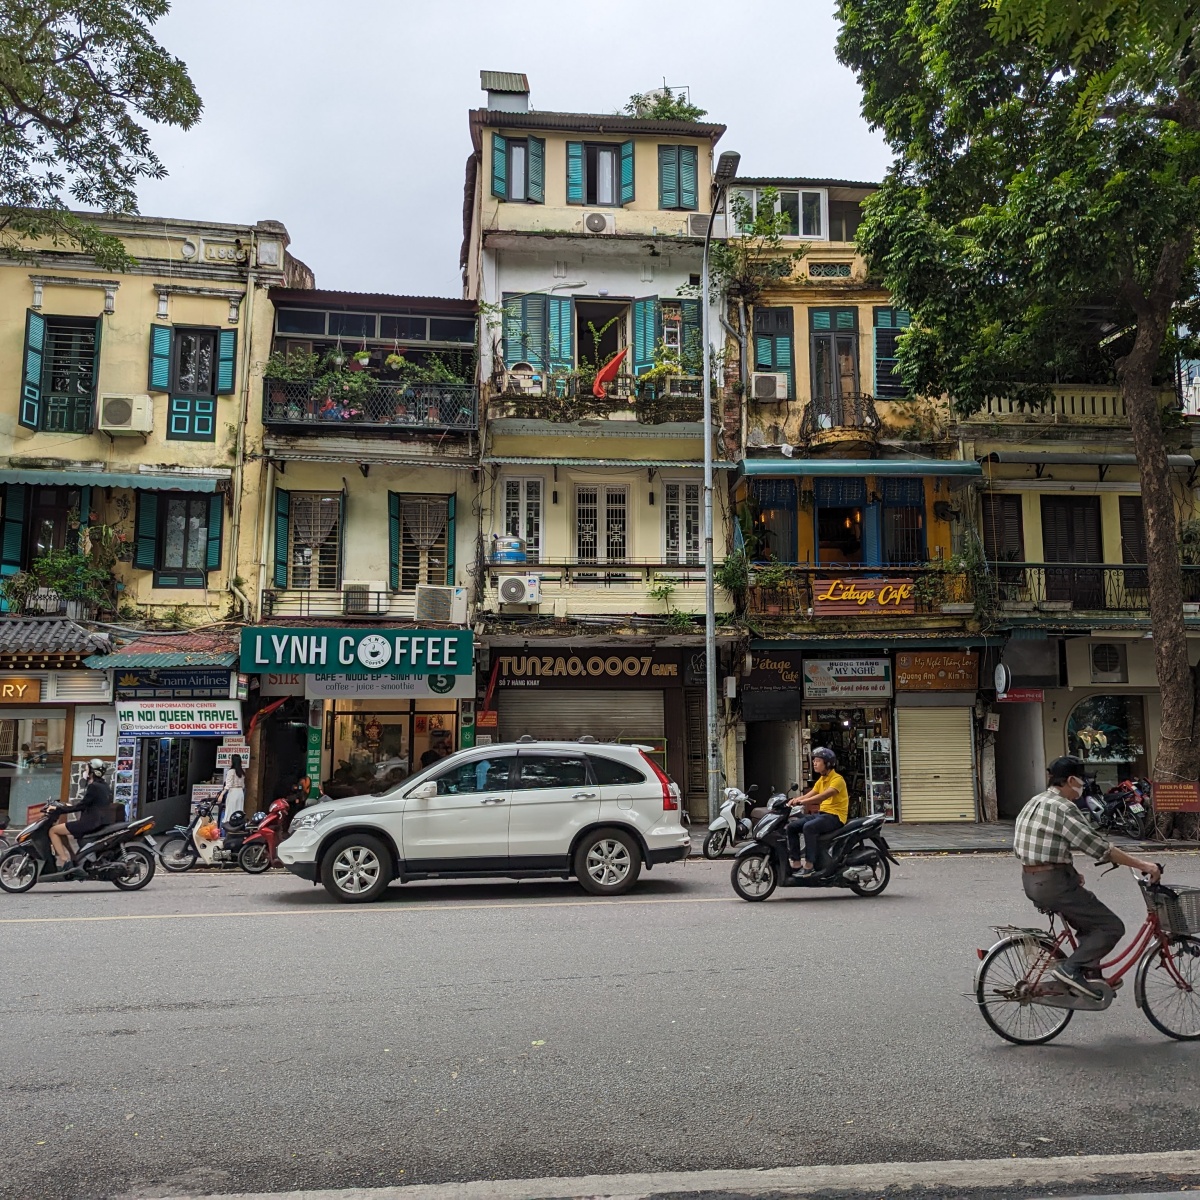 Arriving in Hanoi: First Thoughts on Vietnam